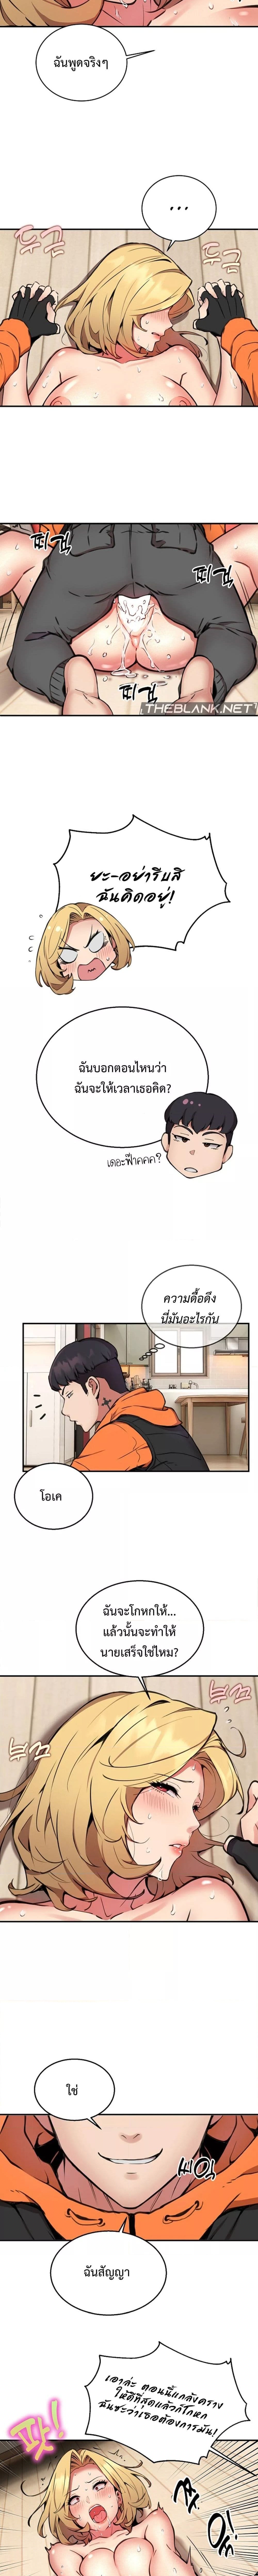 Driver in the New City ตอนที่ 6 ภาพ 7